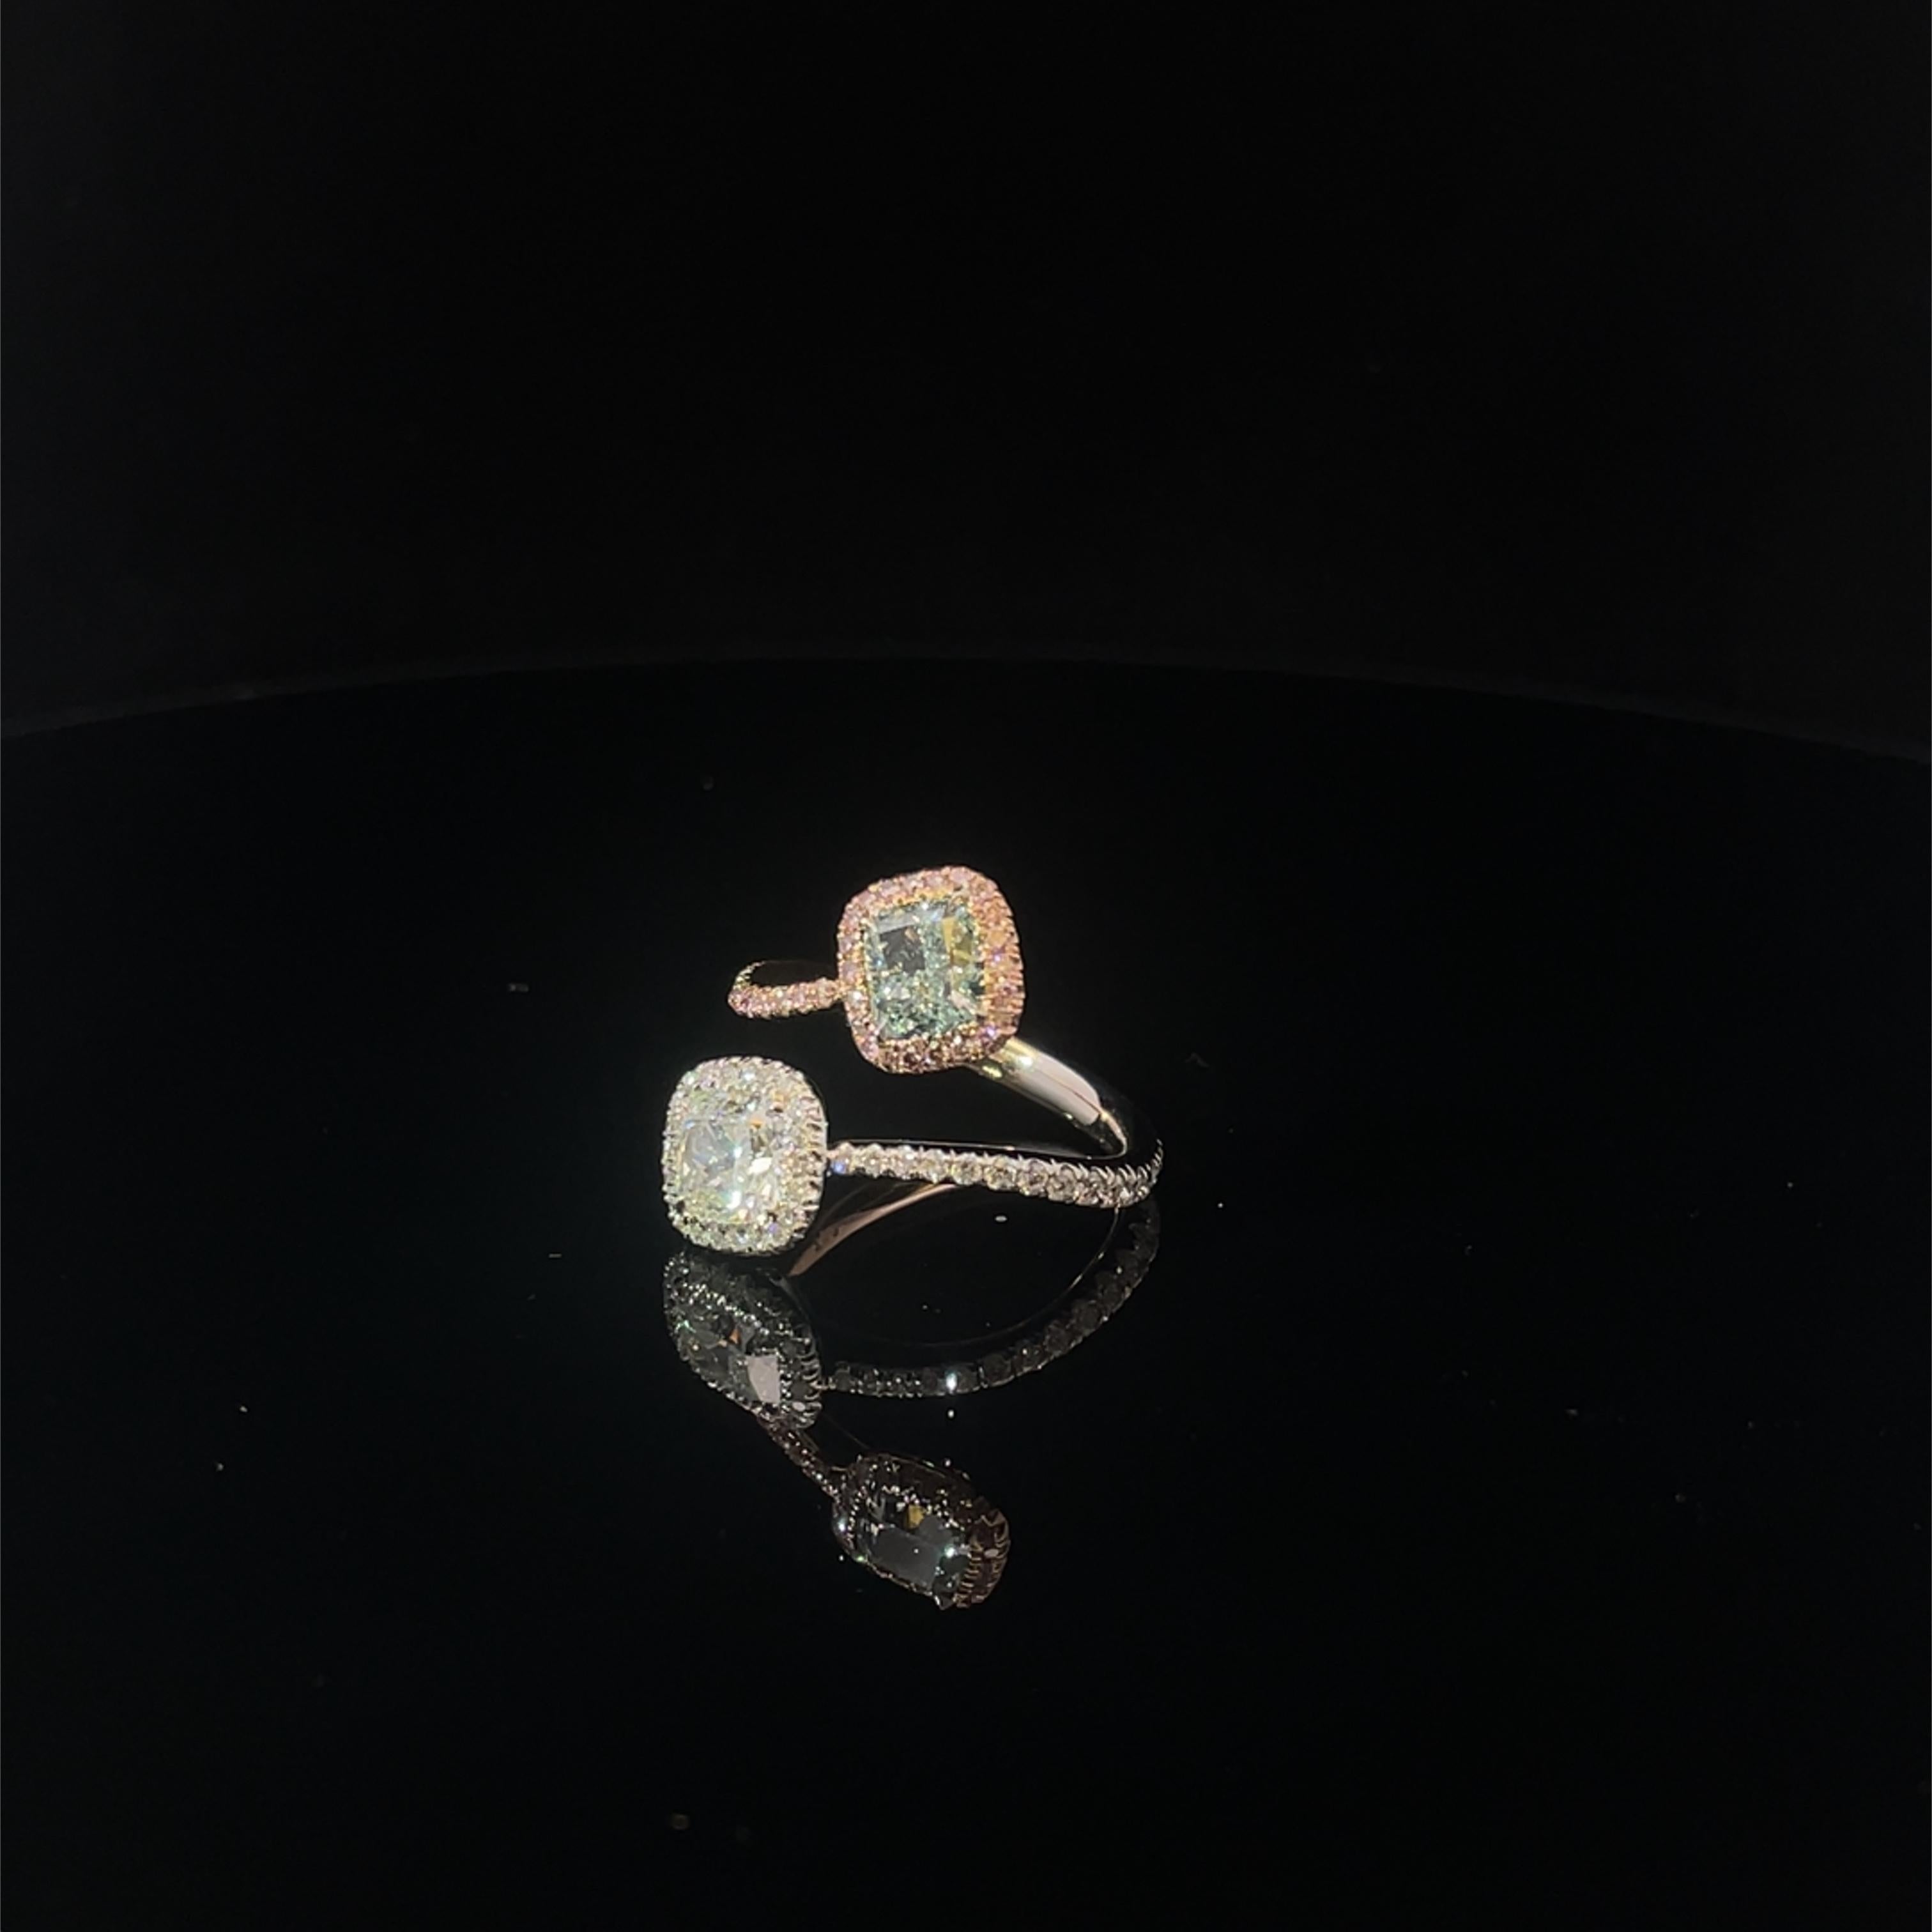 For Sale:  The luxurious 1ct Fancy Light Green Diamond and 1ct White Diamond Cushion Ring 3